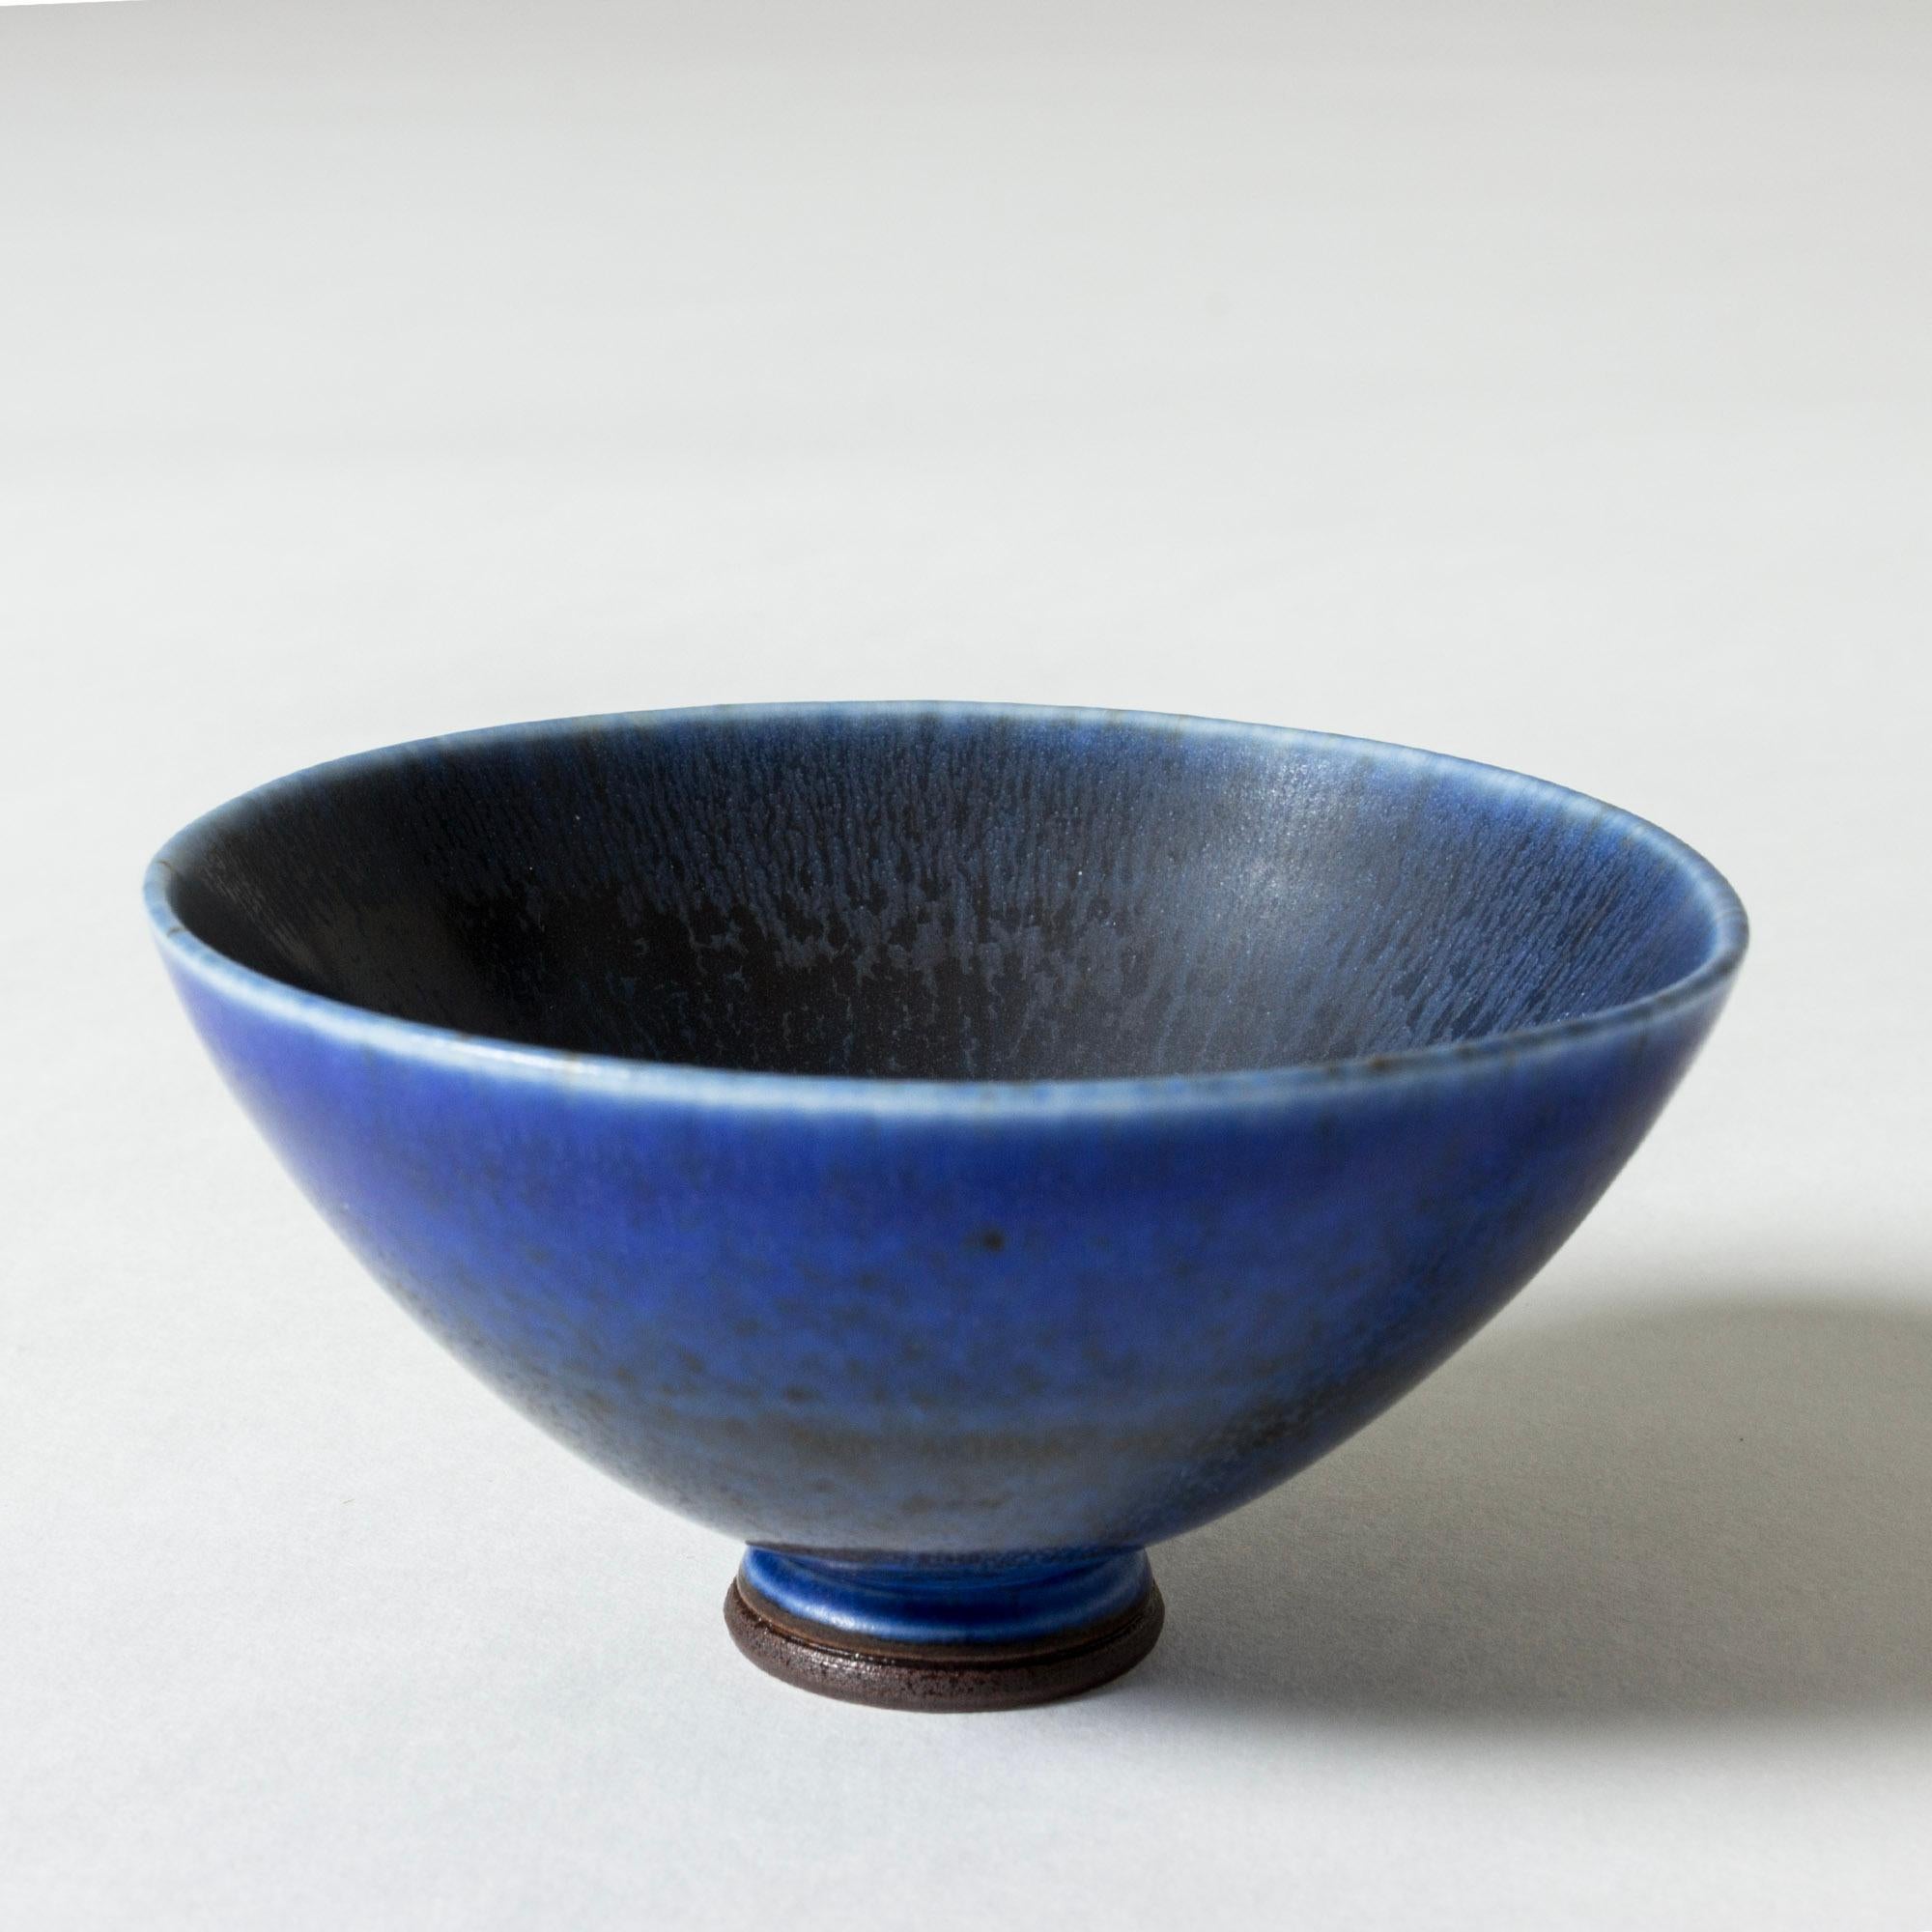 Lovely miniature stoneware bowl by Berndt Friberg. Round form, elegant blue hare’s fur glaze.

Berndt Friberg was a Swedish ceramicist, renowned for his stoneware vases and vessels for Gustavsberg. His pure, composed designs with satiny, compelling